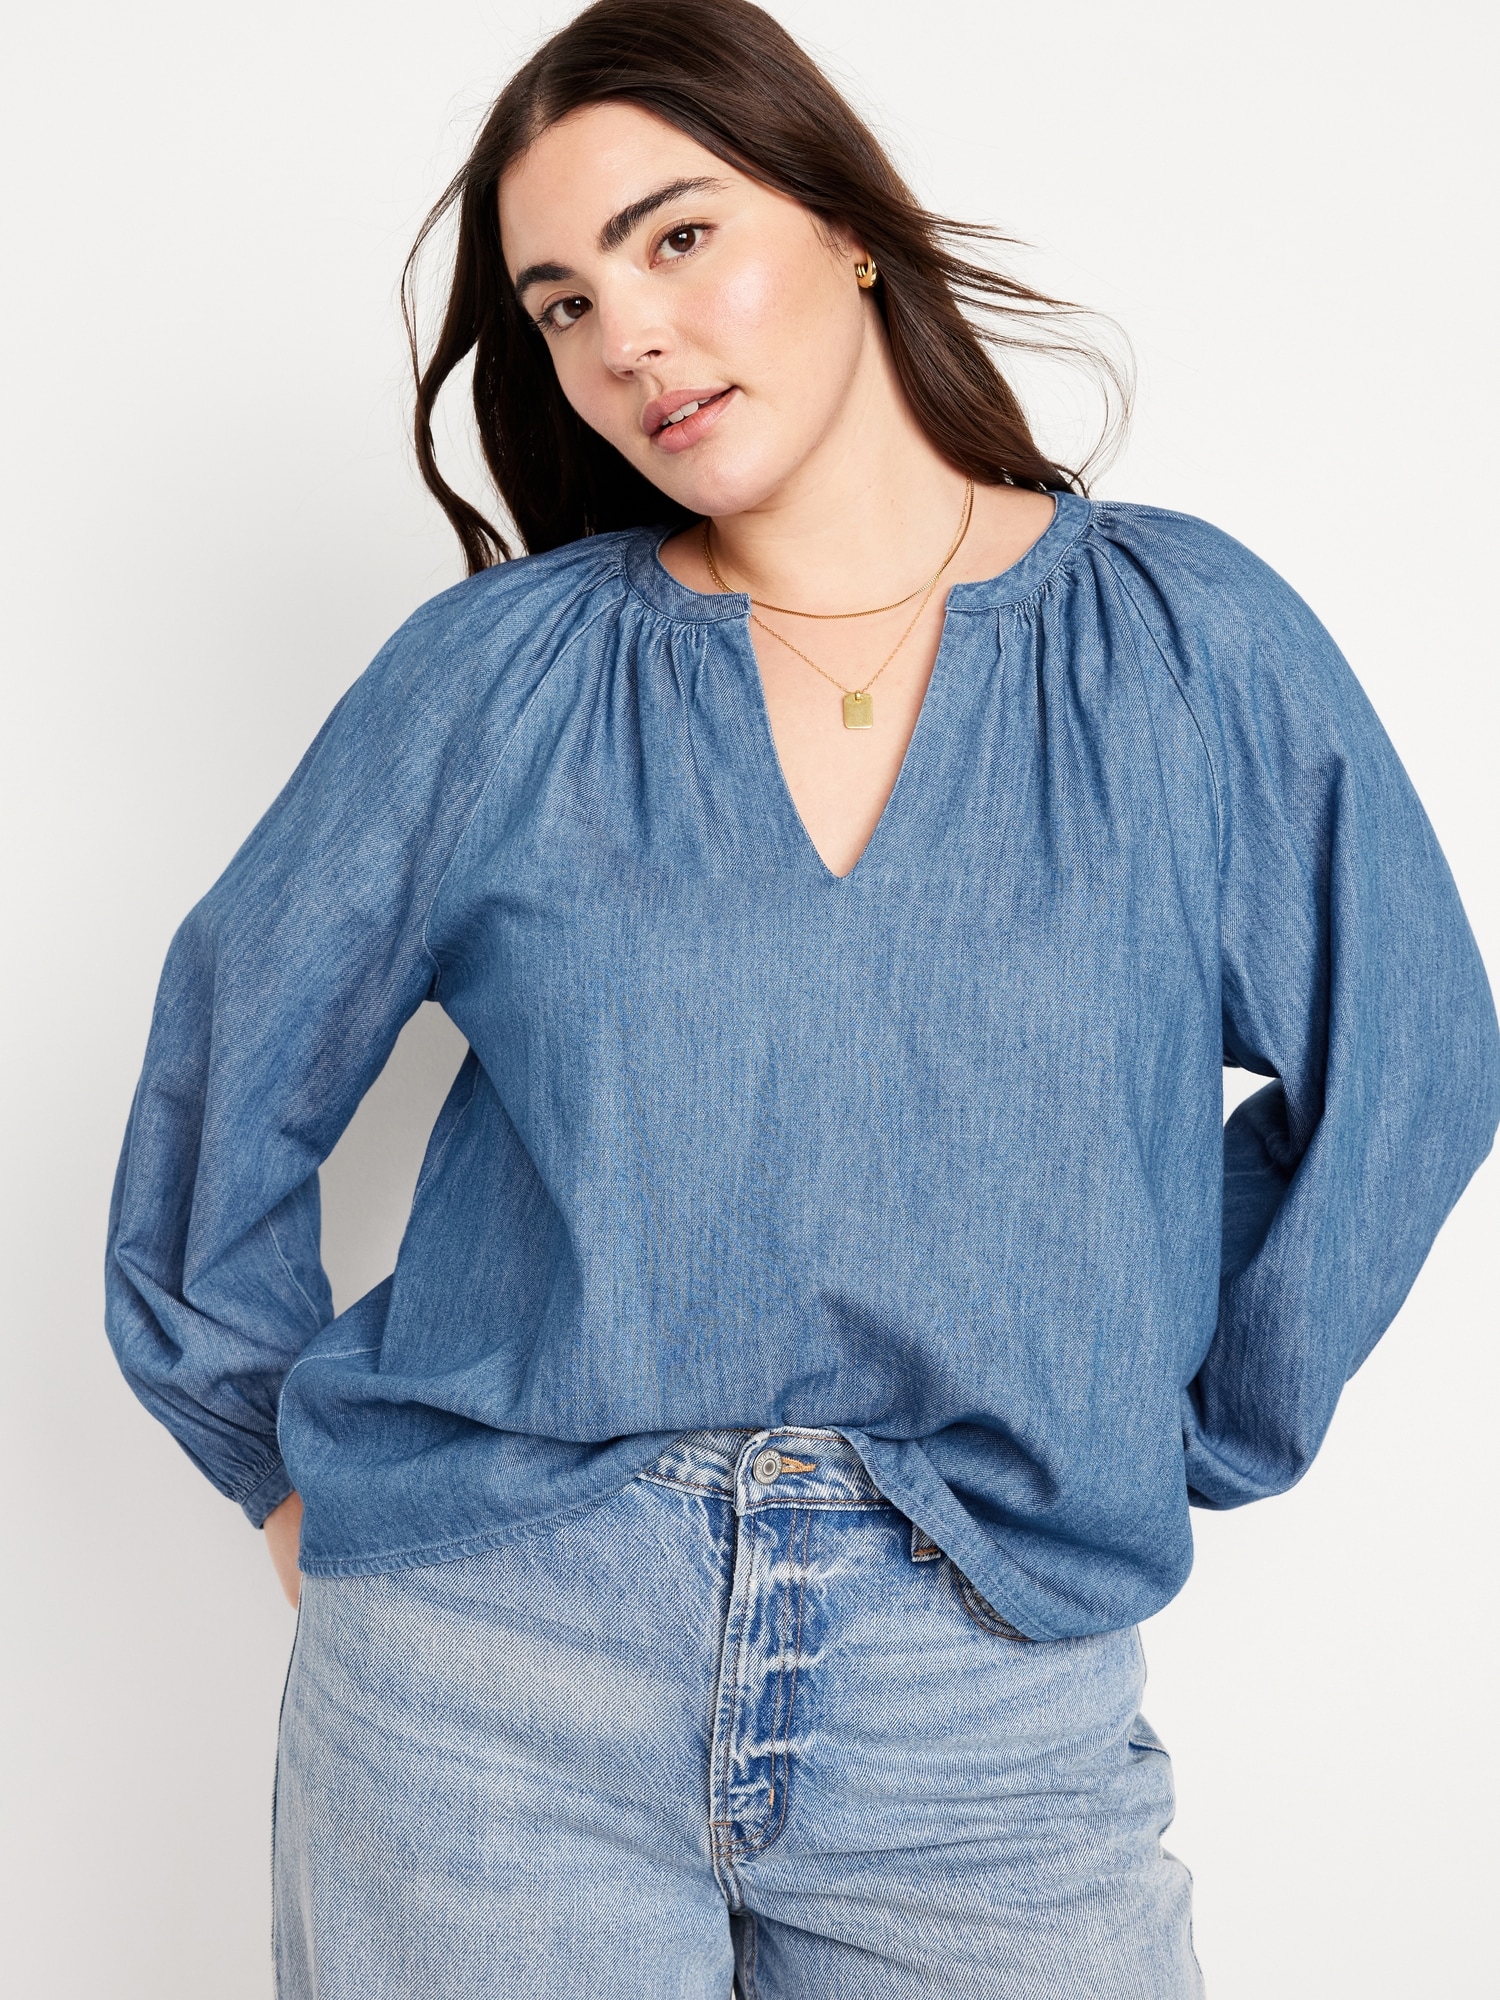 Long-Sleeve Chambray Top | Old Navy